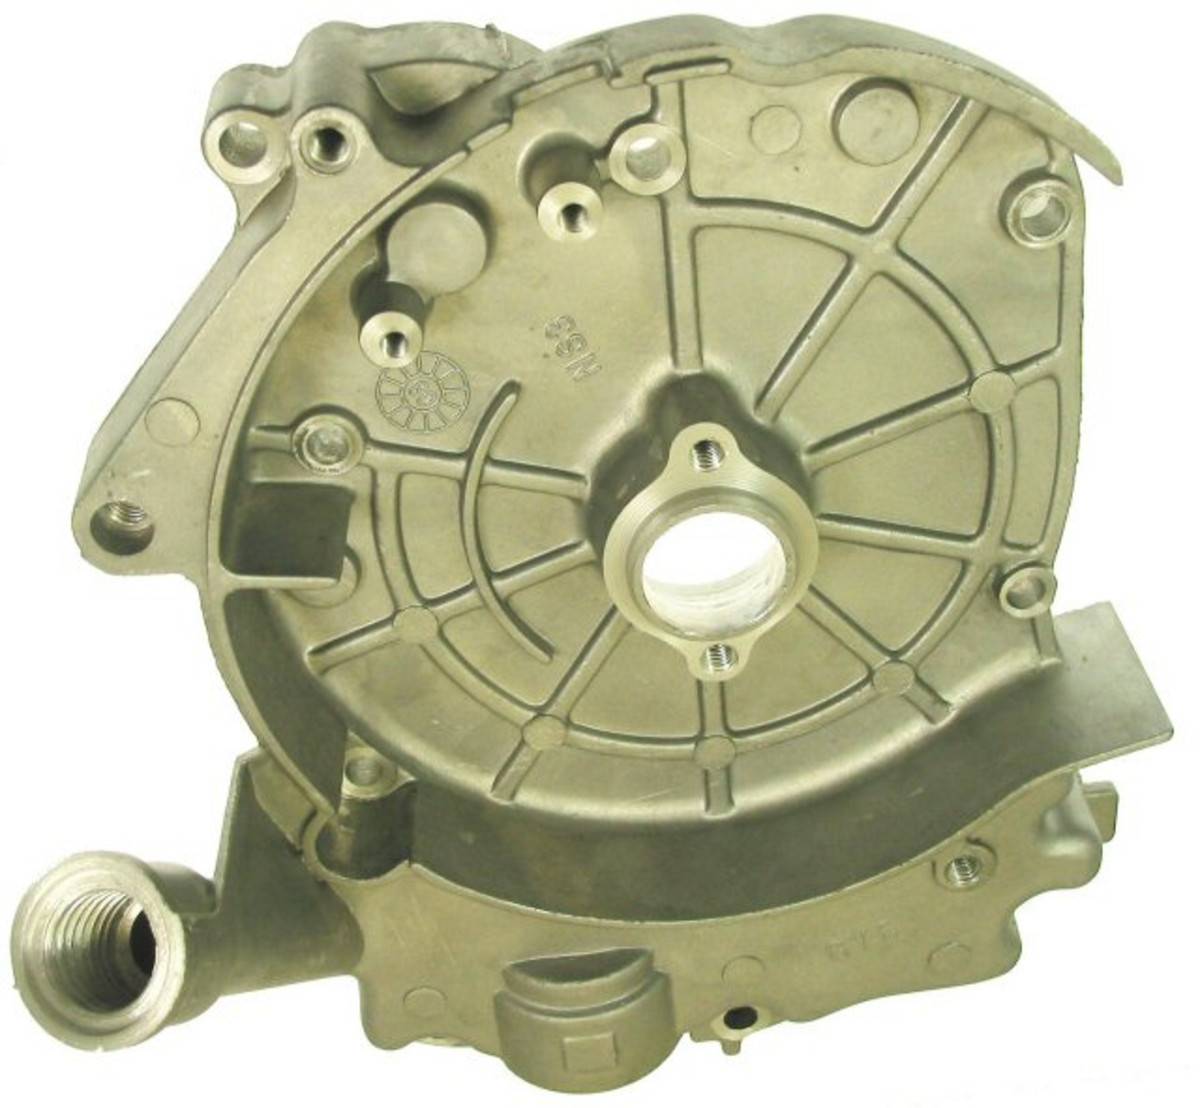 Universal Parts GY6 Right Crankcase Cover